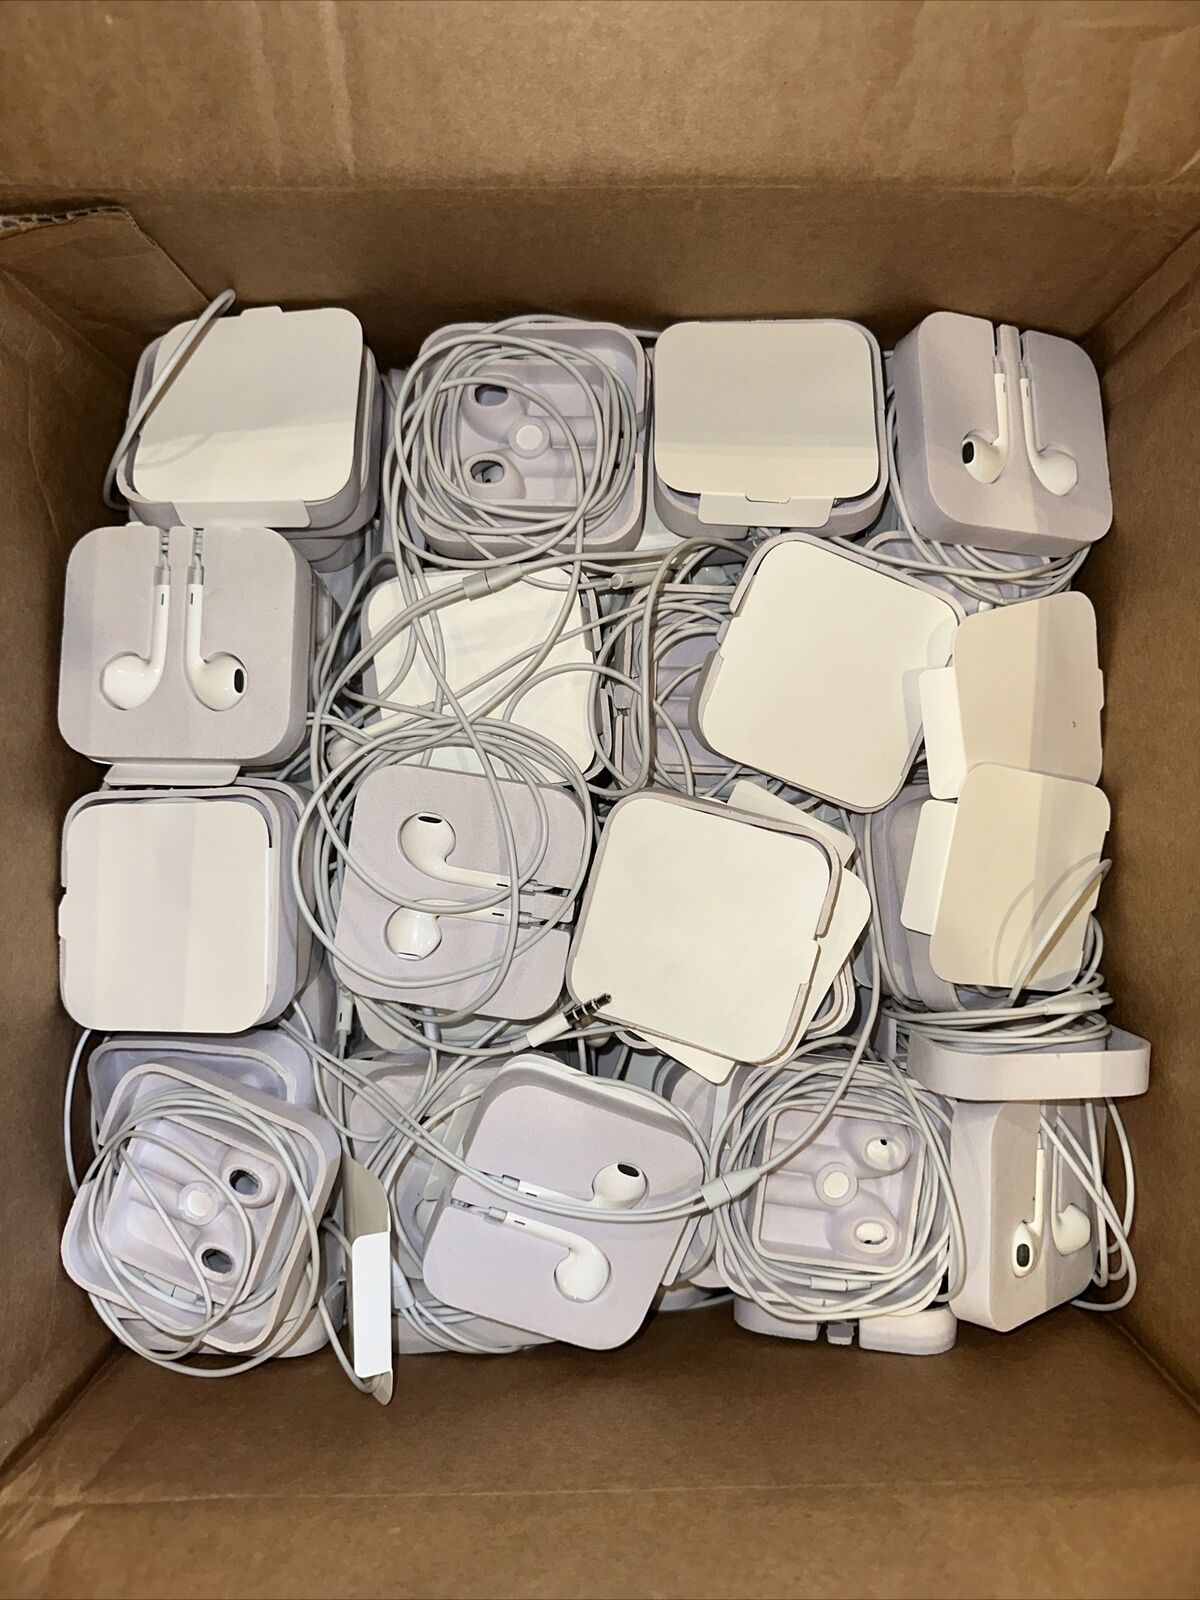 LOT OF 500 OEM GENUINE Apple Wired Stereo Headphone Jack Ear Buds NEW OPEN BOX